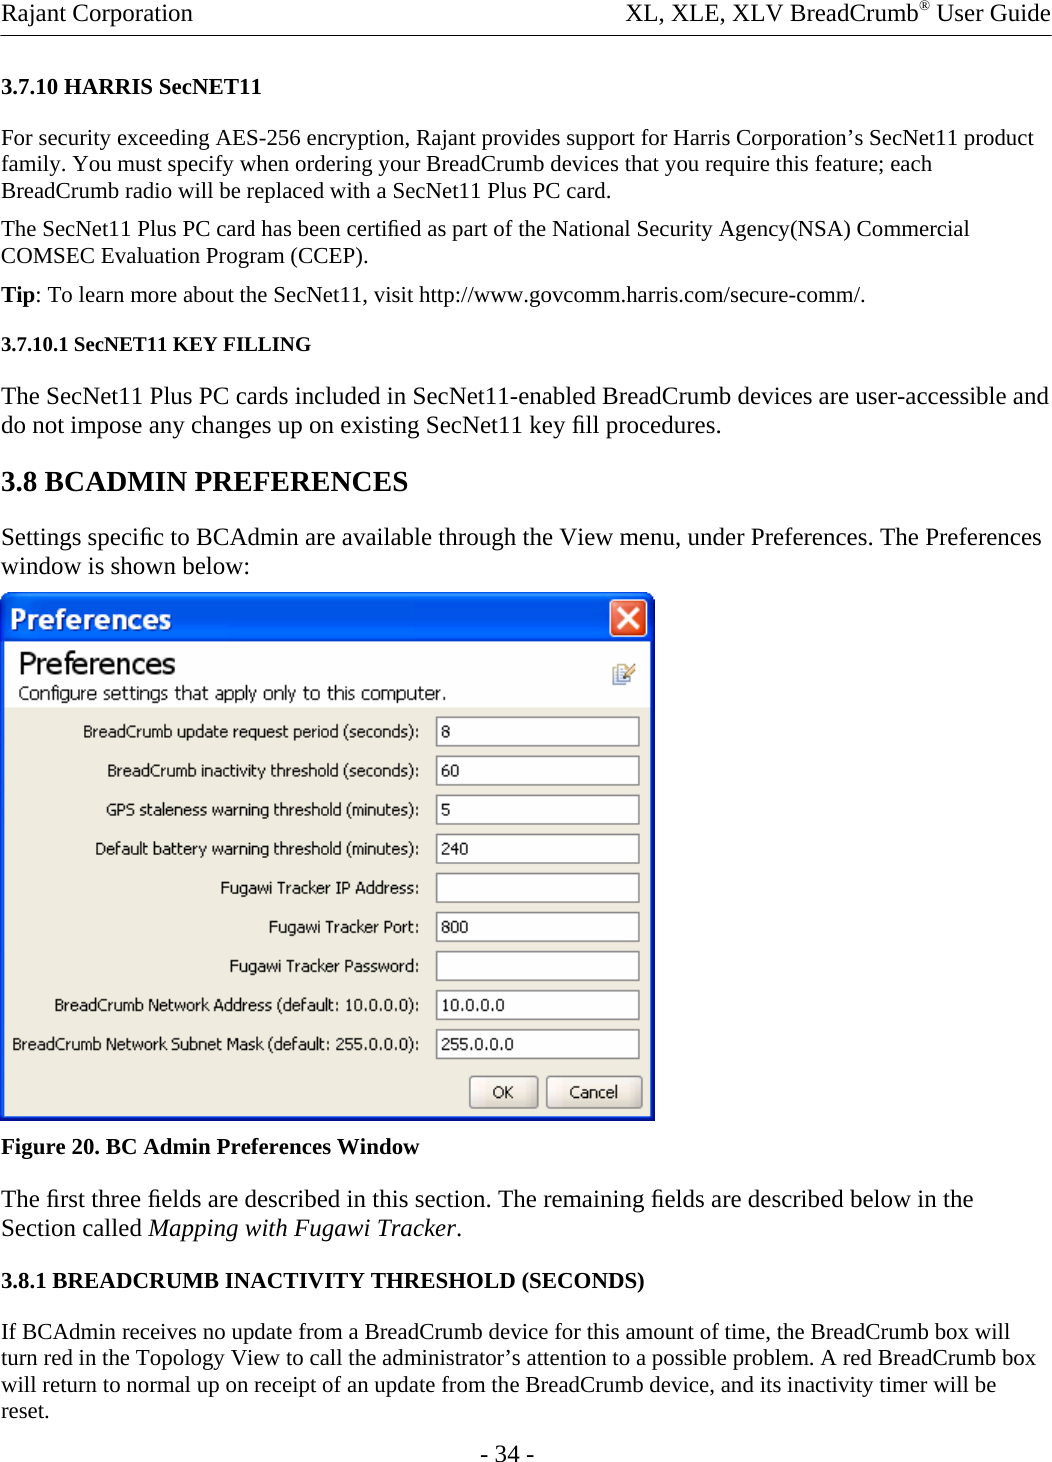 Rajant Corporation    XL, XLE, XLV BreadCrumb® User Guide 3.7.10 HARRIS SecNET11  For security exceeding AES-256 encryption, Rajant provides support for Harris Corporation’s SecNet11 product family. You must specify when ordering your BreadCrumb devices that you require this feature; each BreadCrumb radio will be replaced with a SecNet11 Plus PC card.  The SecNet11 Plus PC card has been certiﬁed as part of the National Security Agency(NSA) Commercial COMSEC Evaluation Program (CCEP).  Tip: To learn more about the SecNet11, visit http://www.govcomm.harris.com/secure-comm/.  3.7.10.1 SecNET11 KEY FILLING  The SecNet11 Plus PC cards included in SecNet11-enabled BreadCrumb devices are user-accessible and do not impose any changes up on existing SecNet11 key ﬁll procedures.  3.8 BCADMIN PREFERENCES  Settings speciﬁc to BCAdmin are available through the View menu, under Preferences. The Preferences window is shown below:   Figure 20. BC Admin Preferences Window The ﬁrst three ﬁelds are described in this section. The remaining ﬁelds are described below in the Section called Mapping with Fugawi Tracker.  3.8.1 BREADCRUMB INACTIVITY THRESHOLD (SECONDS)  If BCAdmin receives no update from a BreadCrumb device for this amount of time, the BreadCrumb box will turn red in the Topology View to call the administrator’s attention to a possible problem. A red BreadCrumb box will return to normal up on receipt of an update from the BreadCrumb device, and its inactivity timer will be reset.  - 34 - 